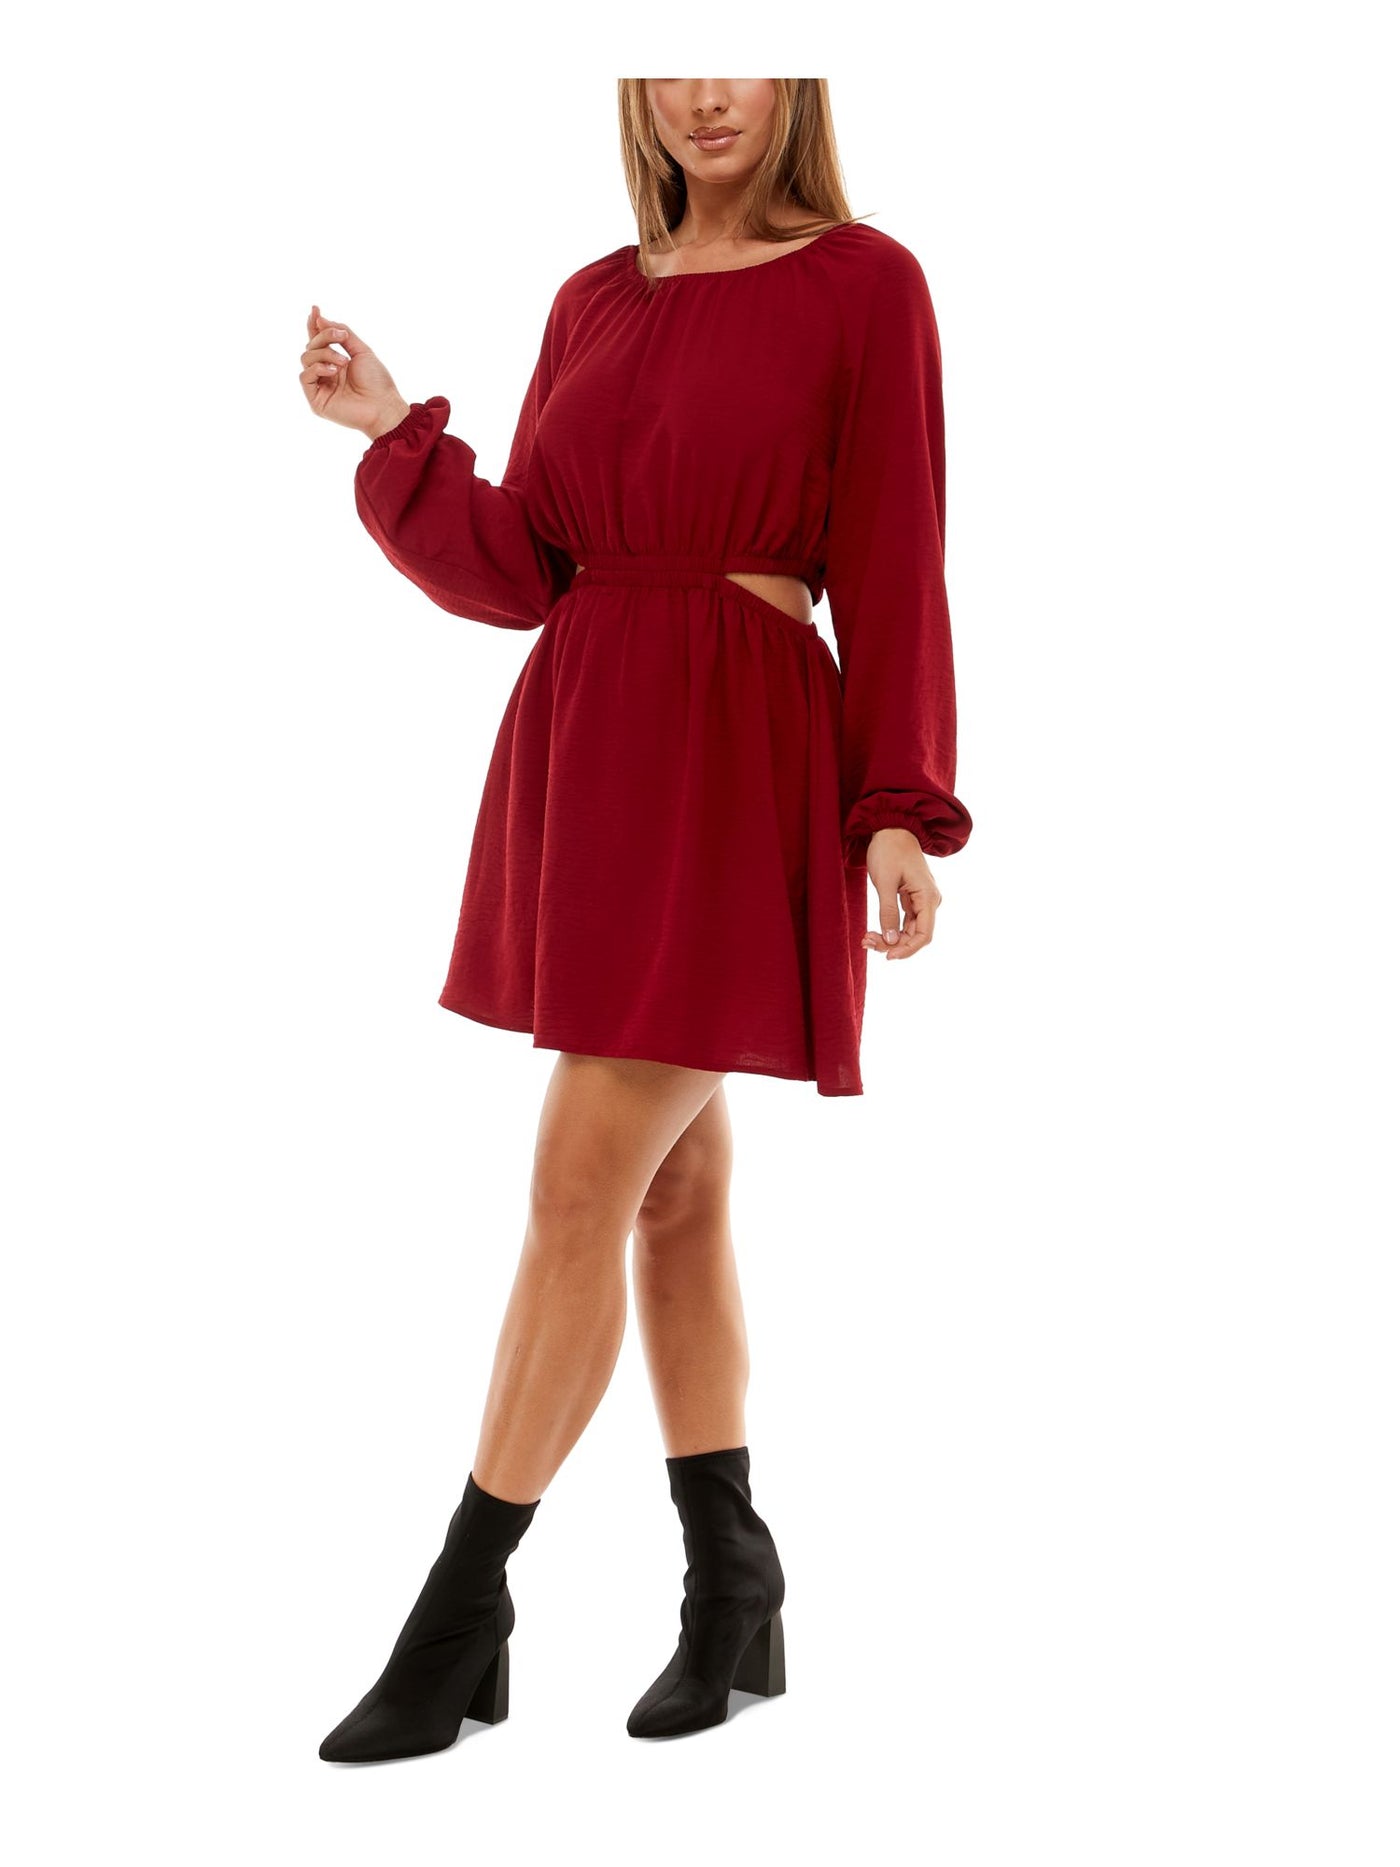 SPEECHLESS Womens Red Cut Out Elastic Waist Button Closure Blouson Sleeve Scoop Neck Above The Knee Party Fit + Flare Dress Juniors XL